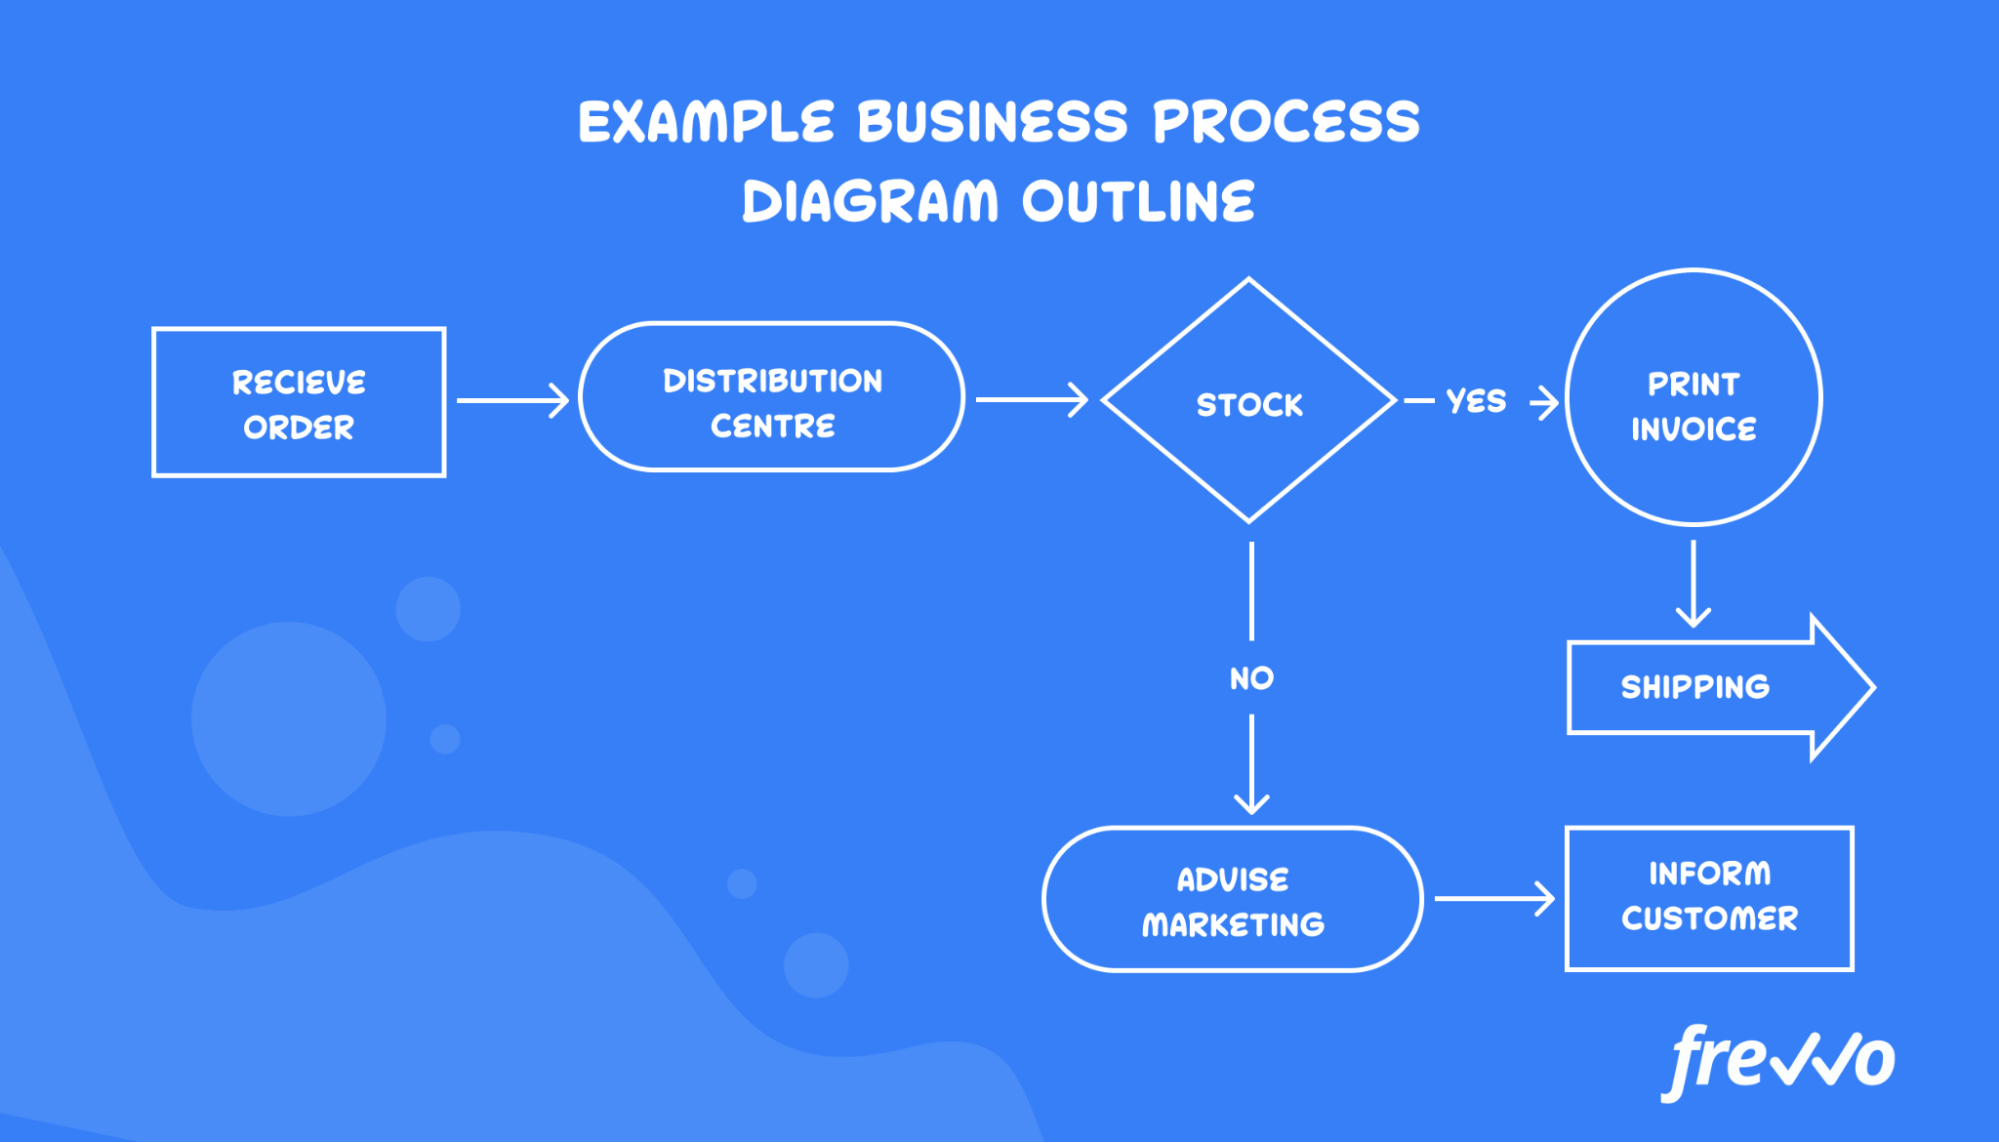 Outline of a business process diagram